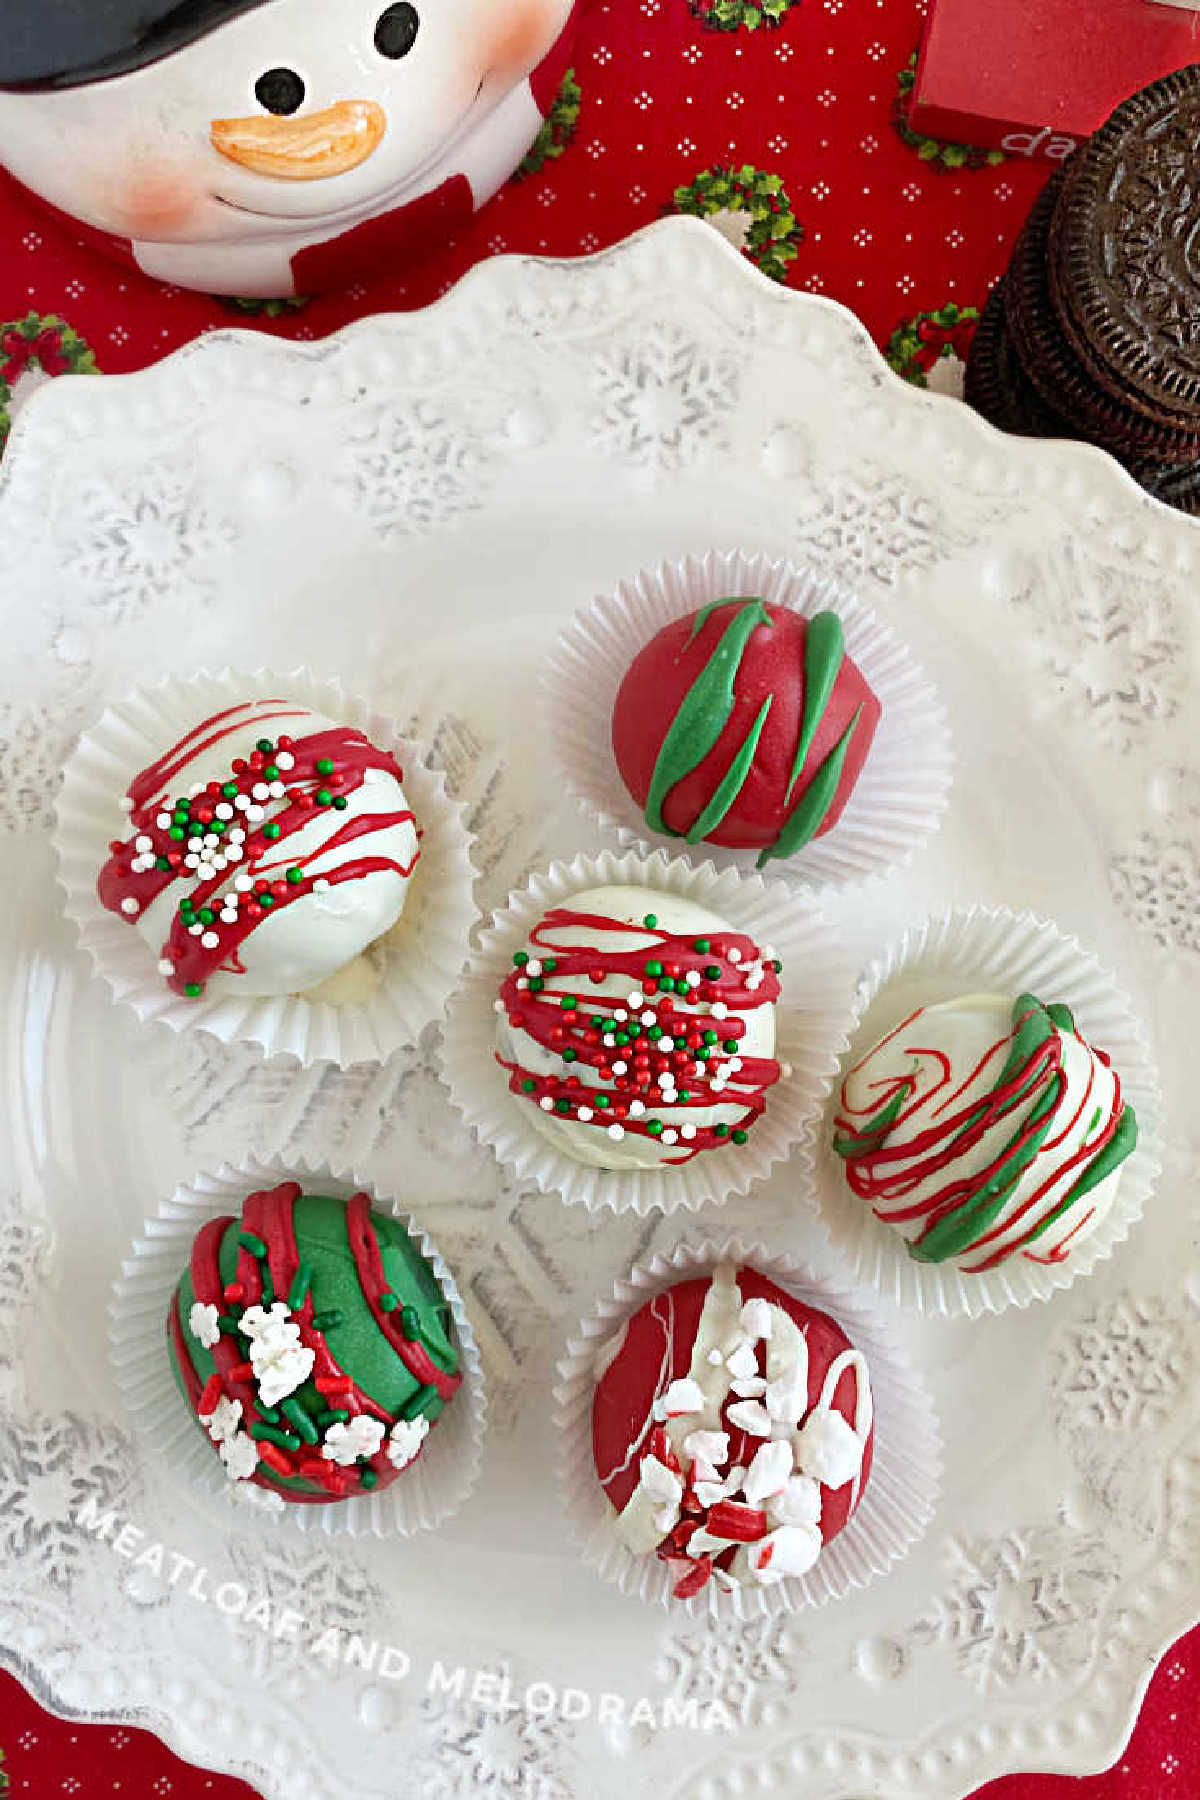 Oreo cake balls in Christmas colors on a white plate